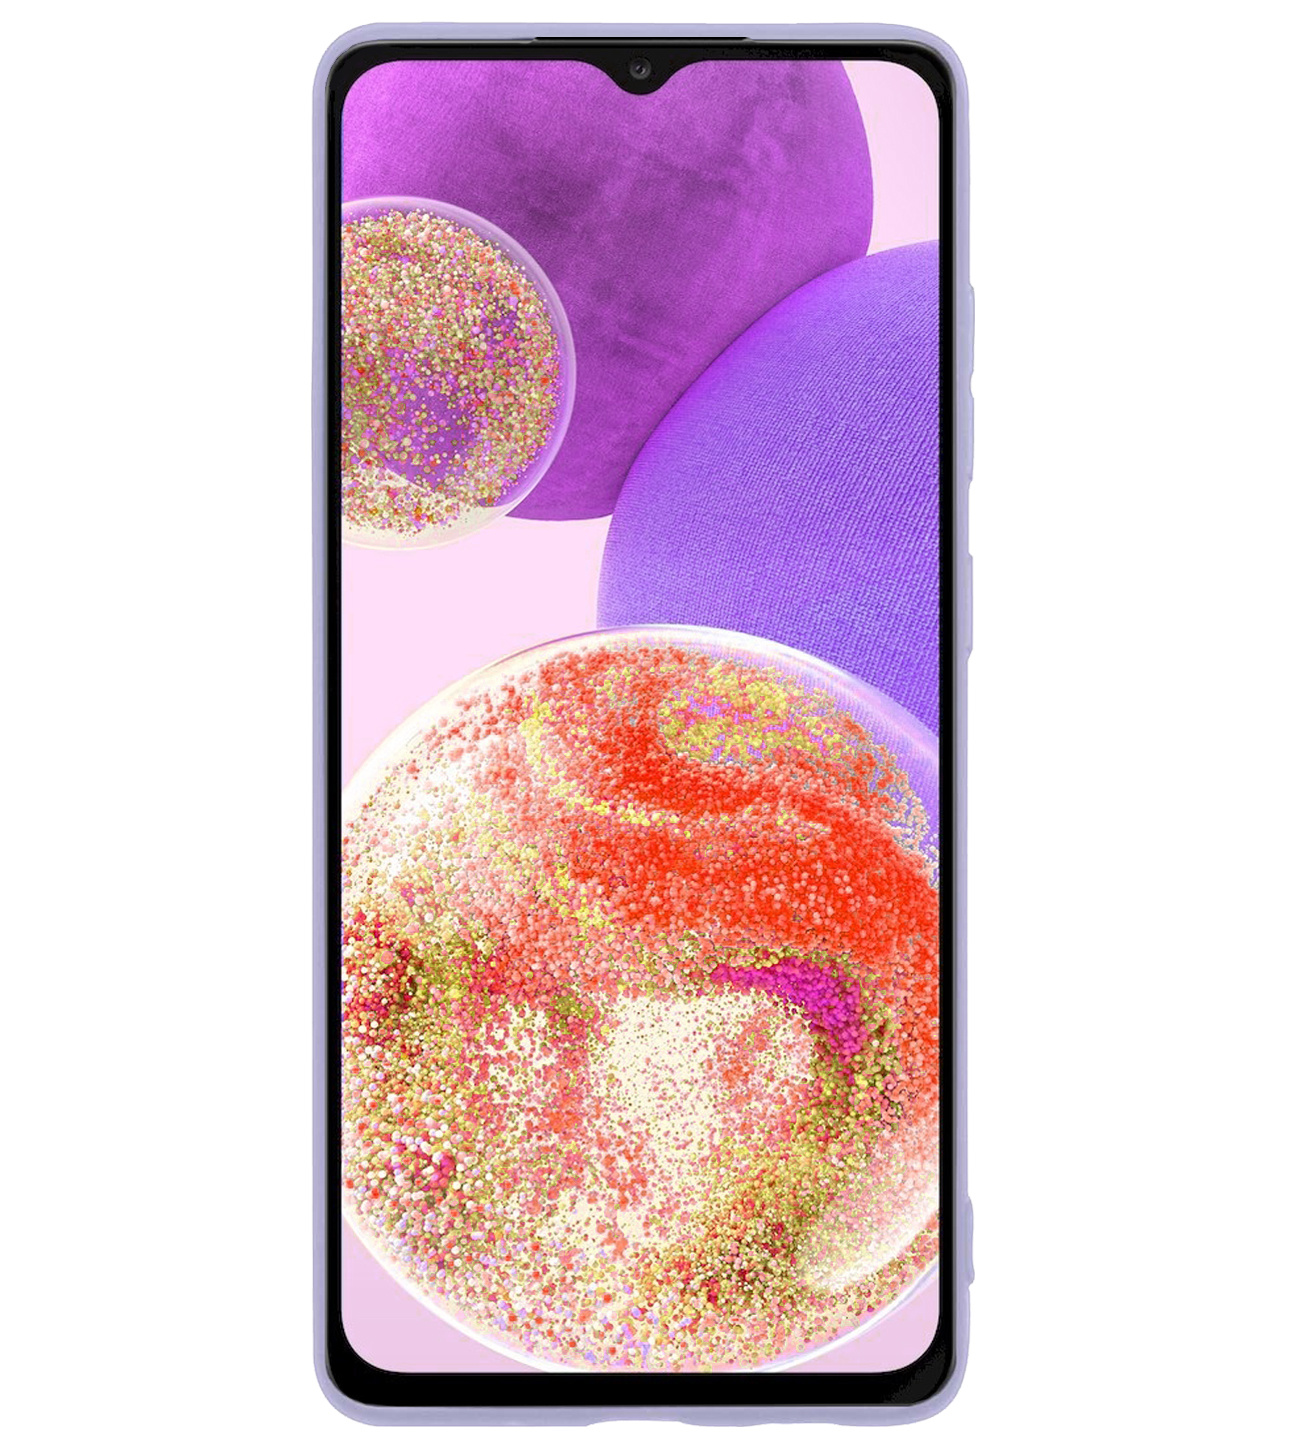 BASEY. Hoes Geschikt voor Samsung A23 Hoesje Siliconen Back Cover Case - Hoesje Geschikt voor Samsung Galaxy A23 Hoes Cover Hoesje - Lila